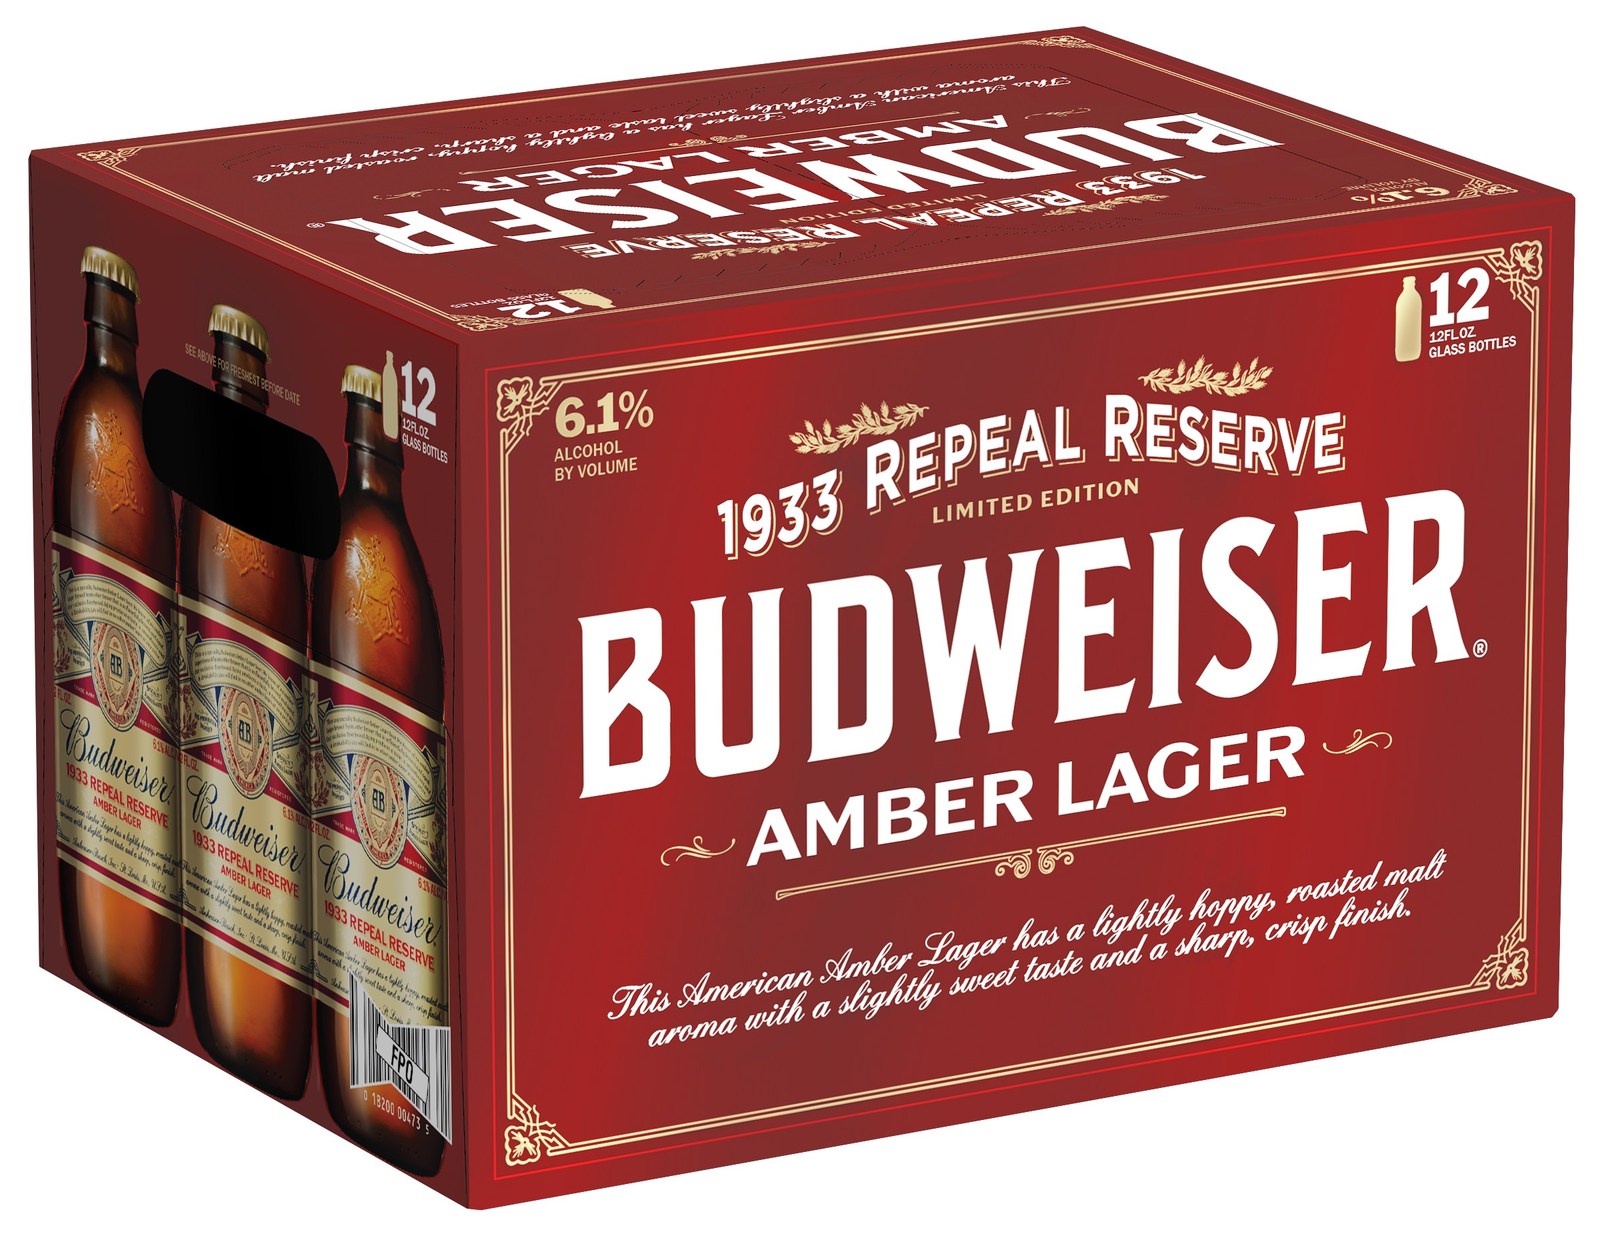 A New Limited Edition Amber Lager Is Released In Honor Of Prohibition’s Repeal